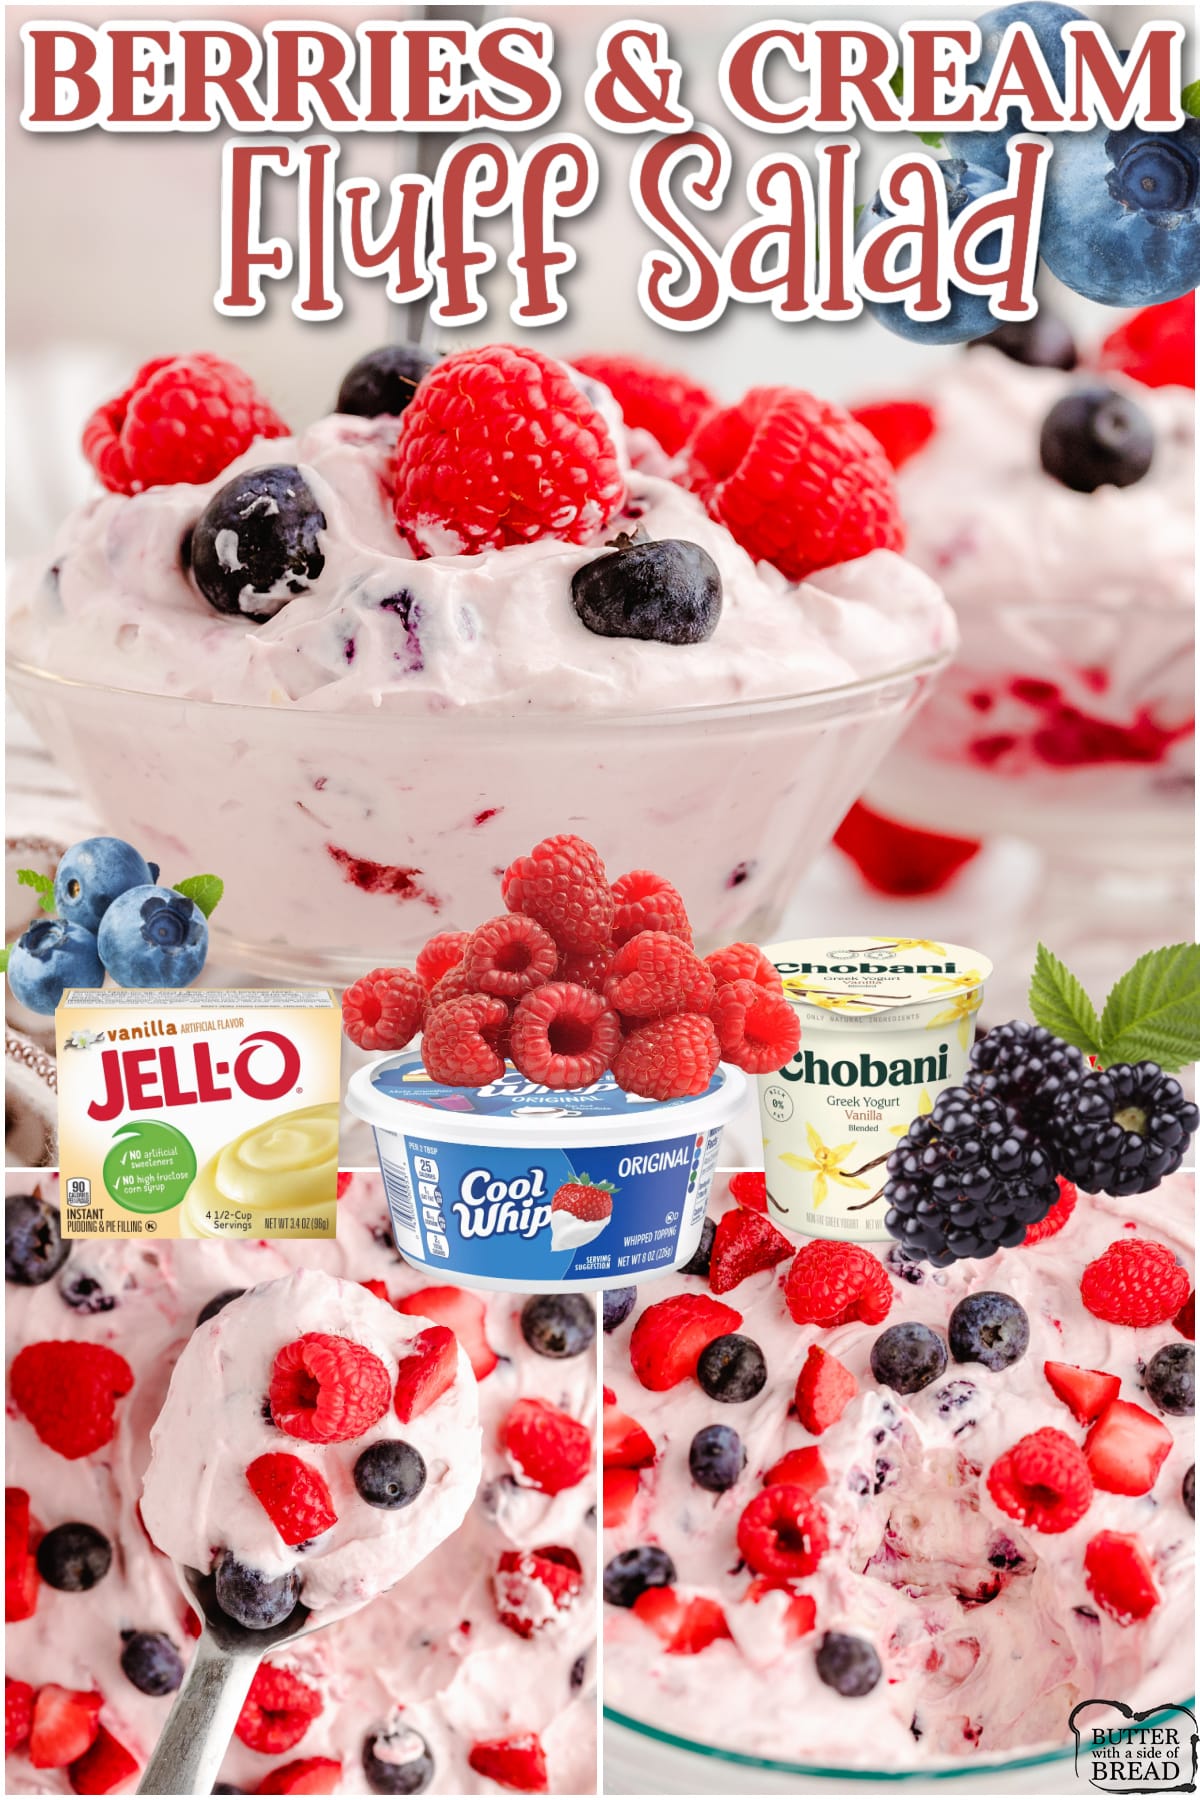 Berries and Cream Salad is an incredible side dish that is made with only 4 basic ingredients! This frozen fruit salad is a fantastic combination of yogurt, frozen berries, and whipped cream.